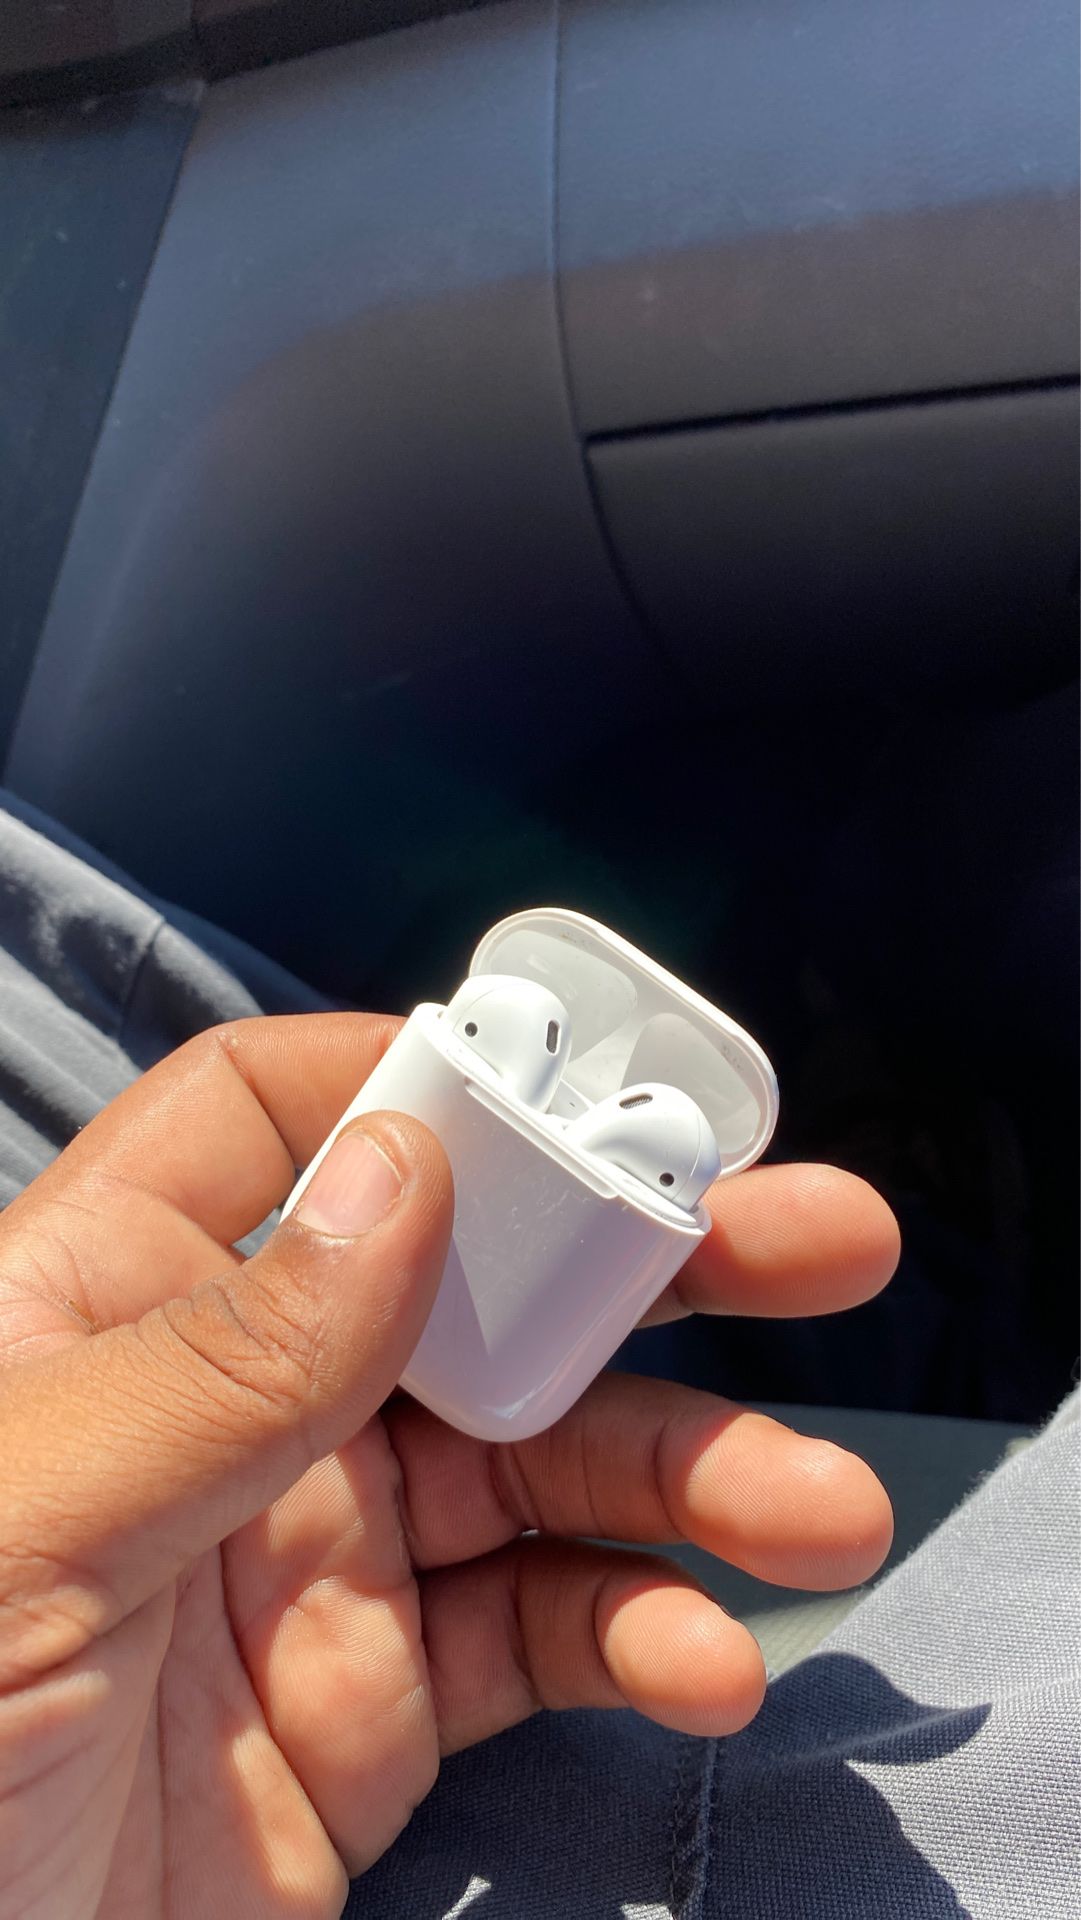 2nd generation AirPods (wireless charging)